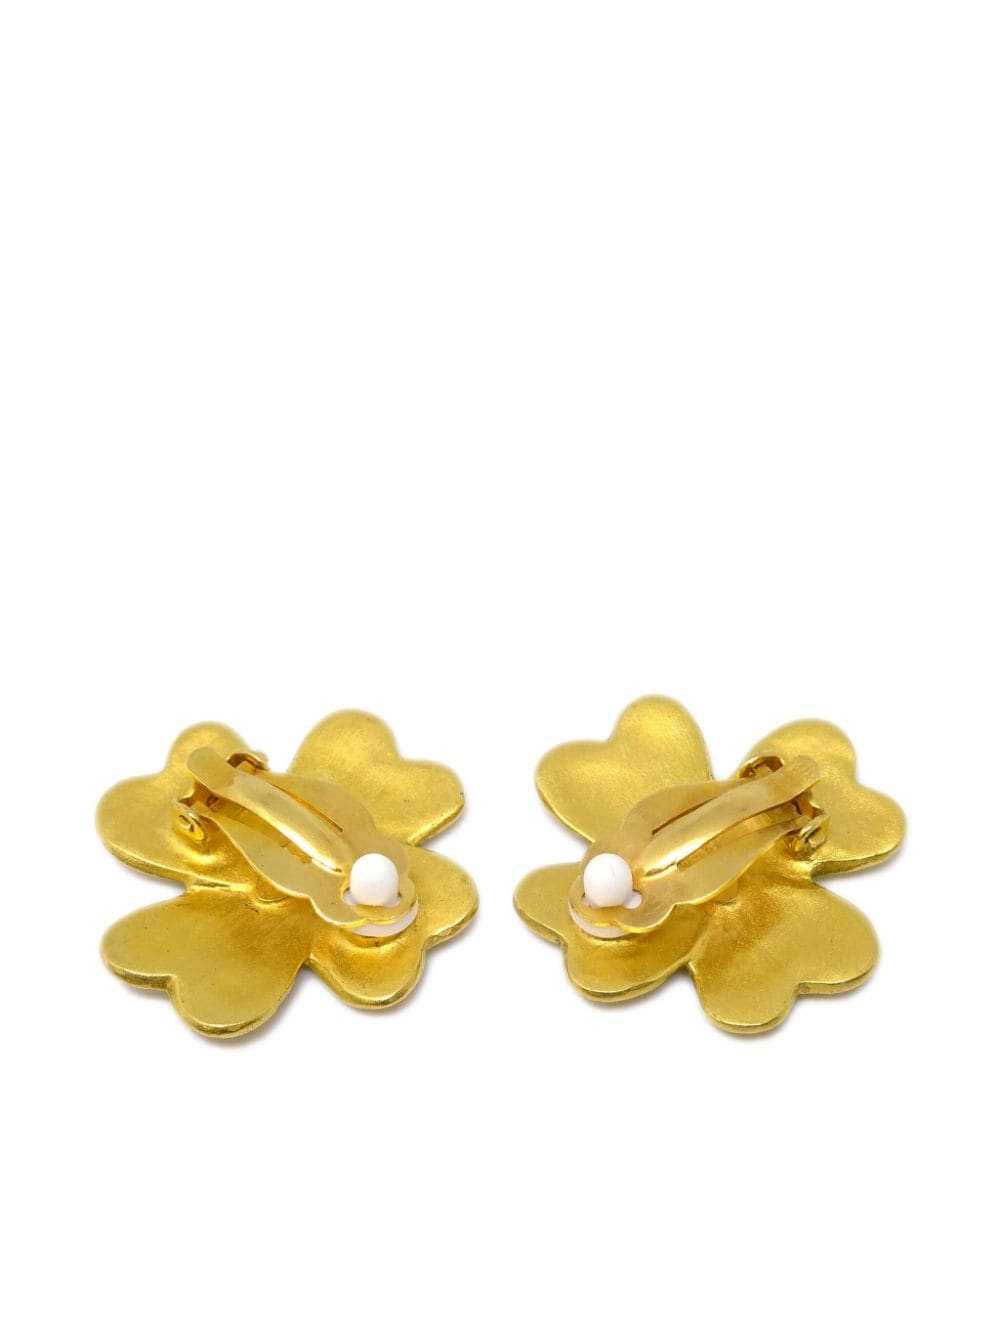 CHANEL Pre-Owned 1995 CC clover earrings - Gold - image 3